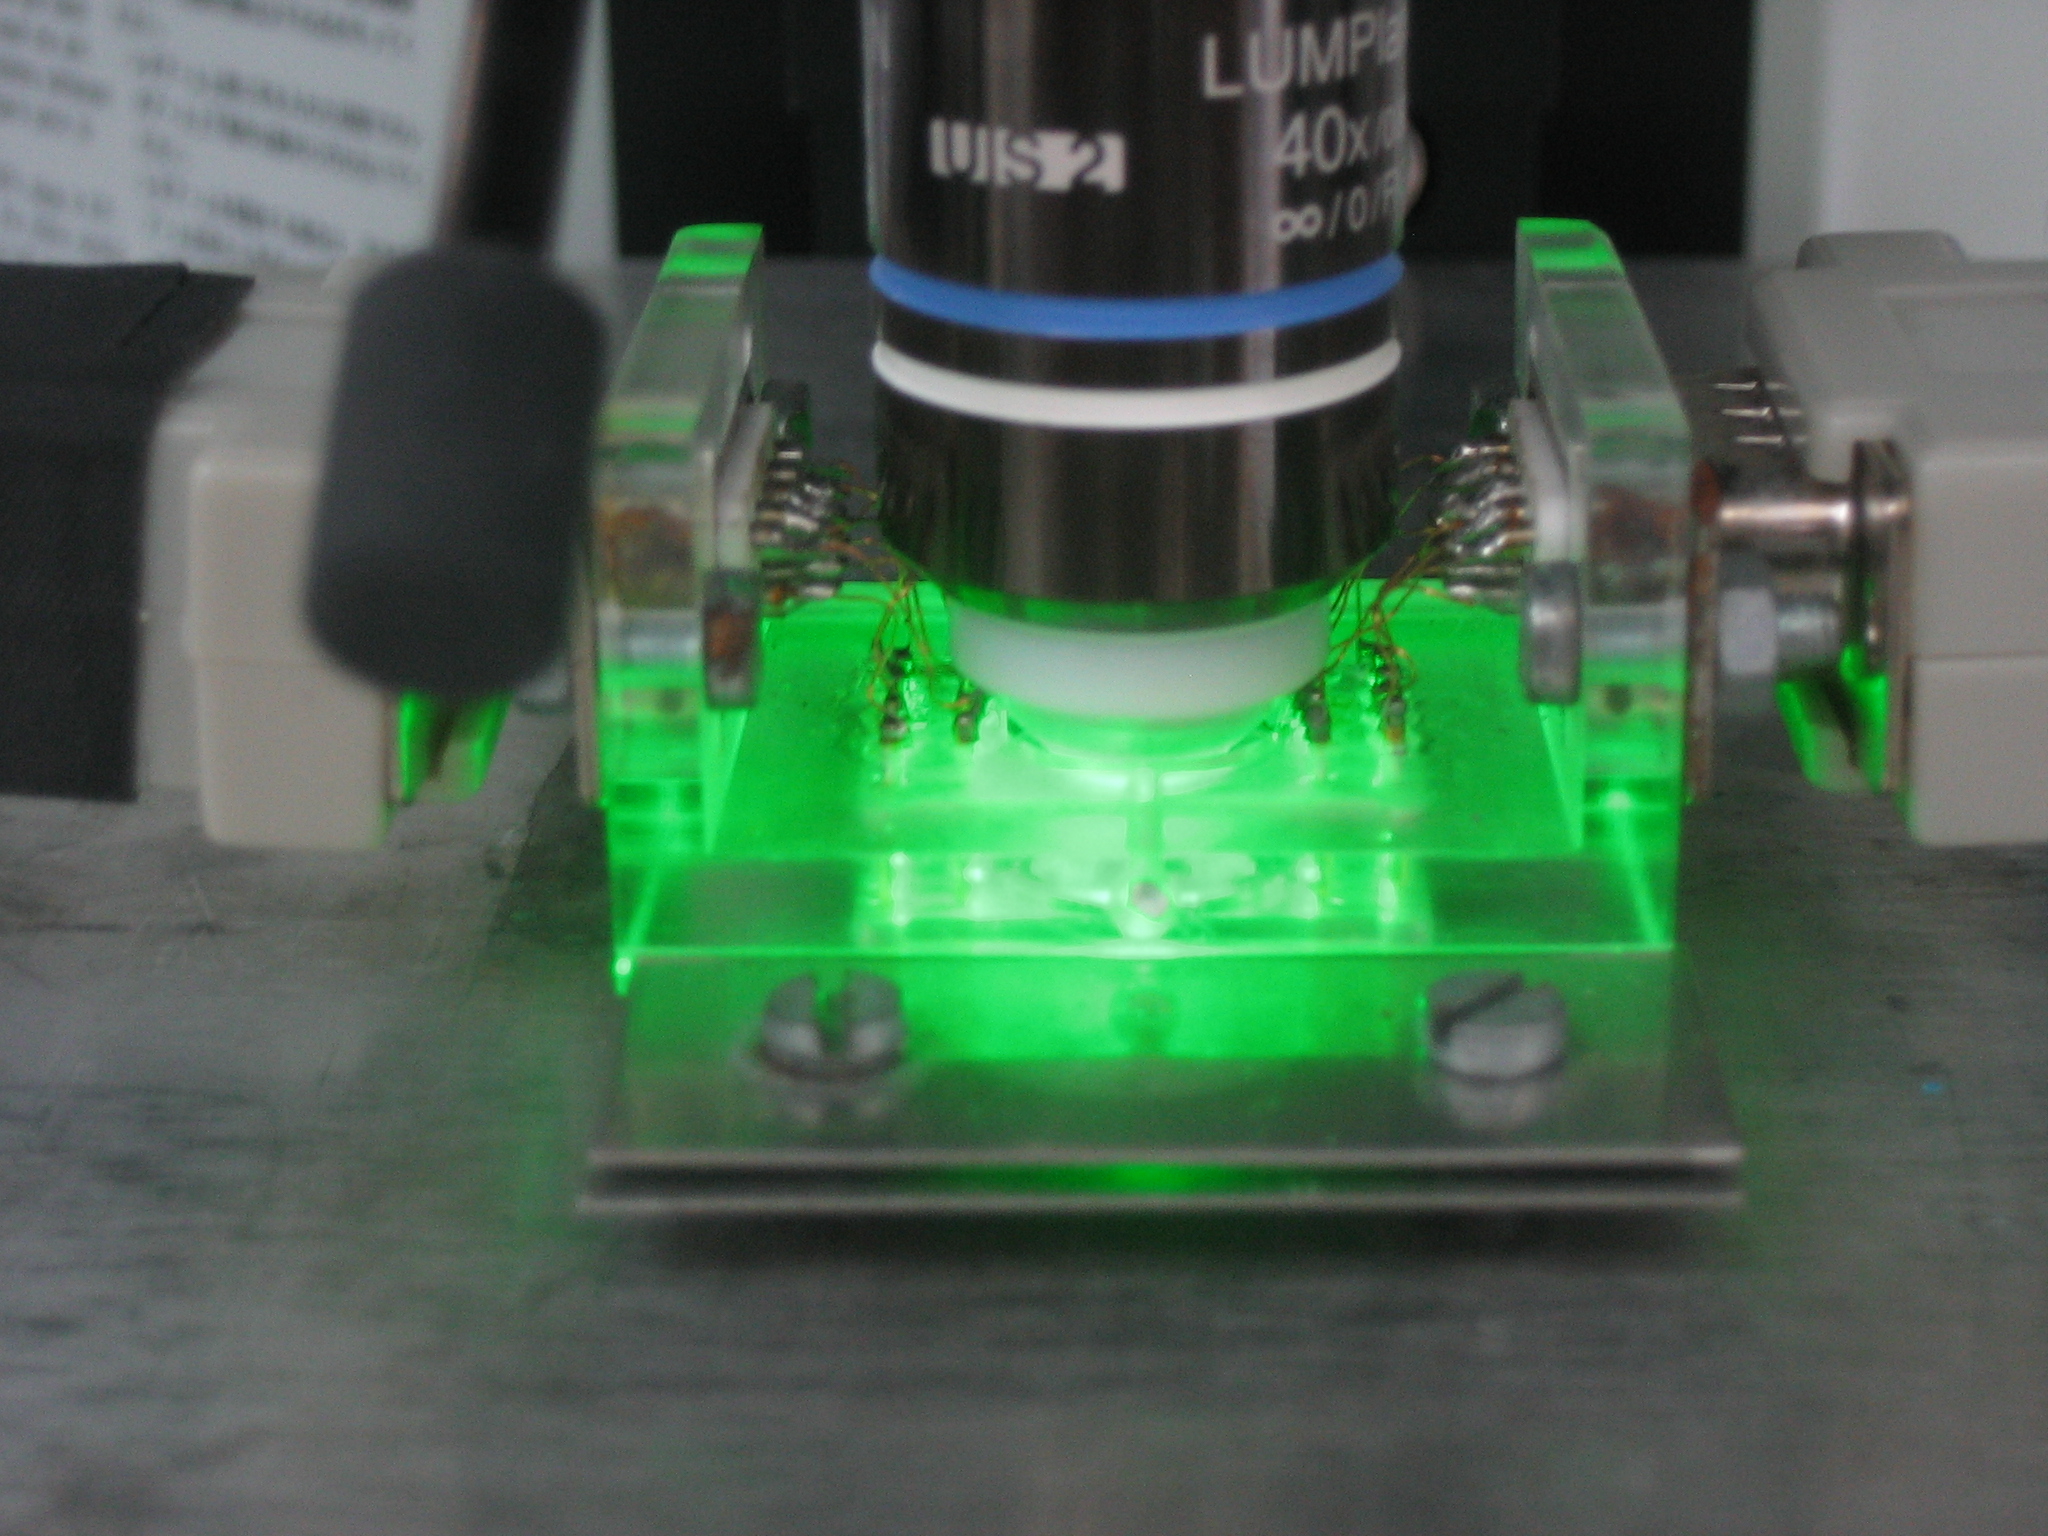 The photo shows a green glowing glass cuboid fixed into a an apparatus.